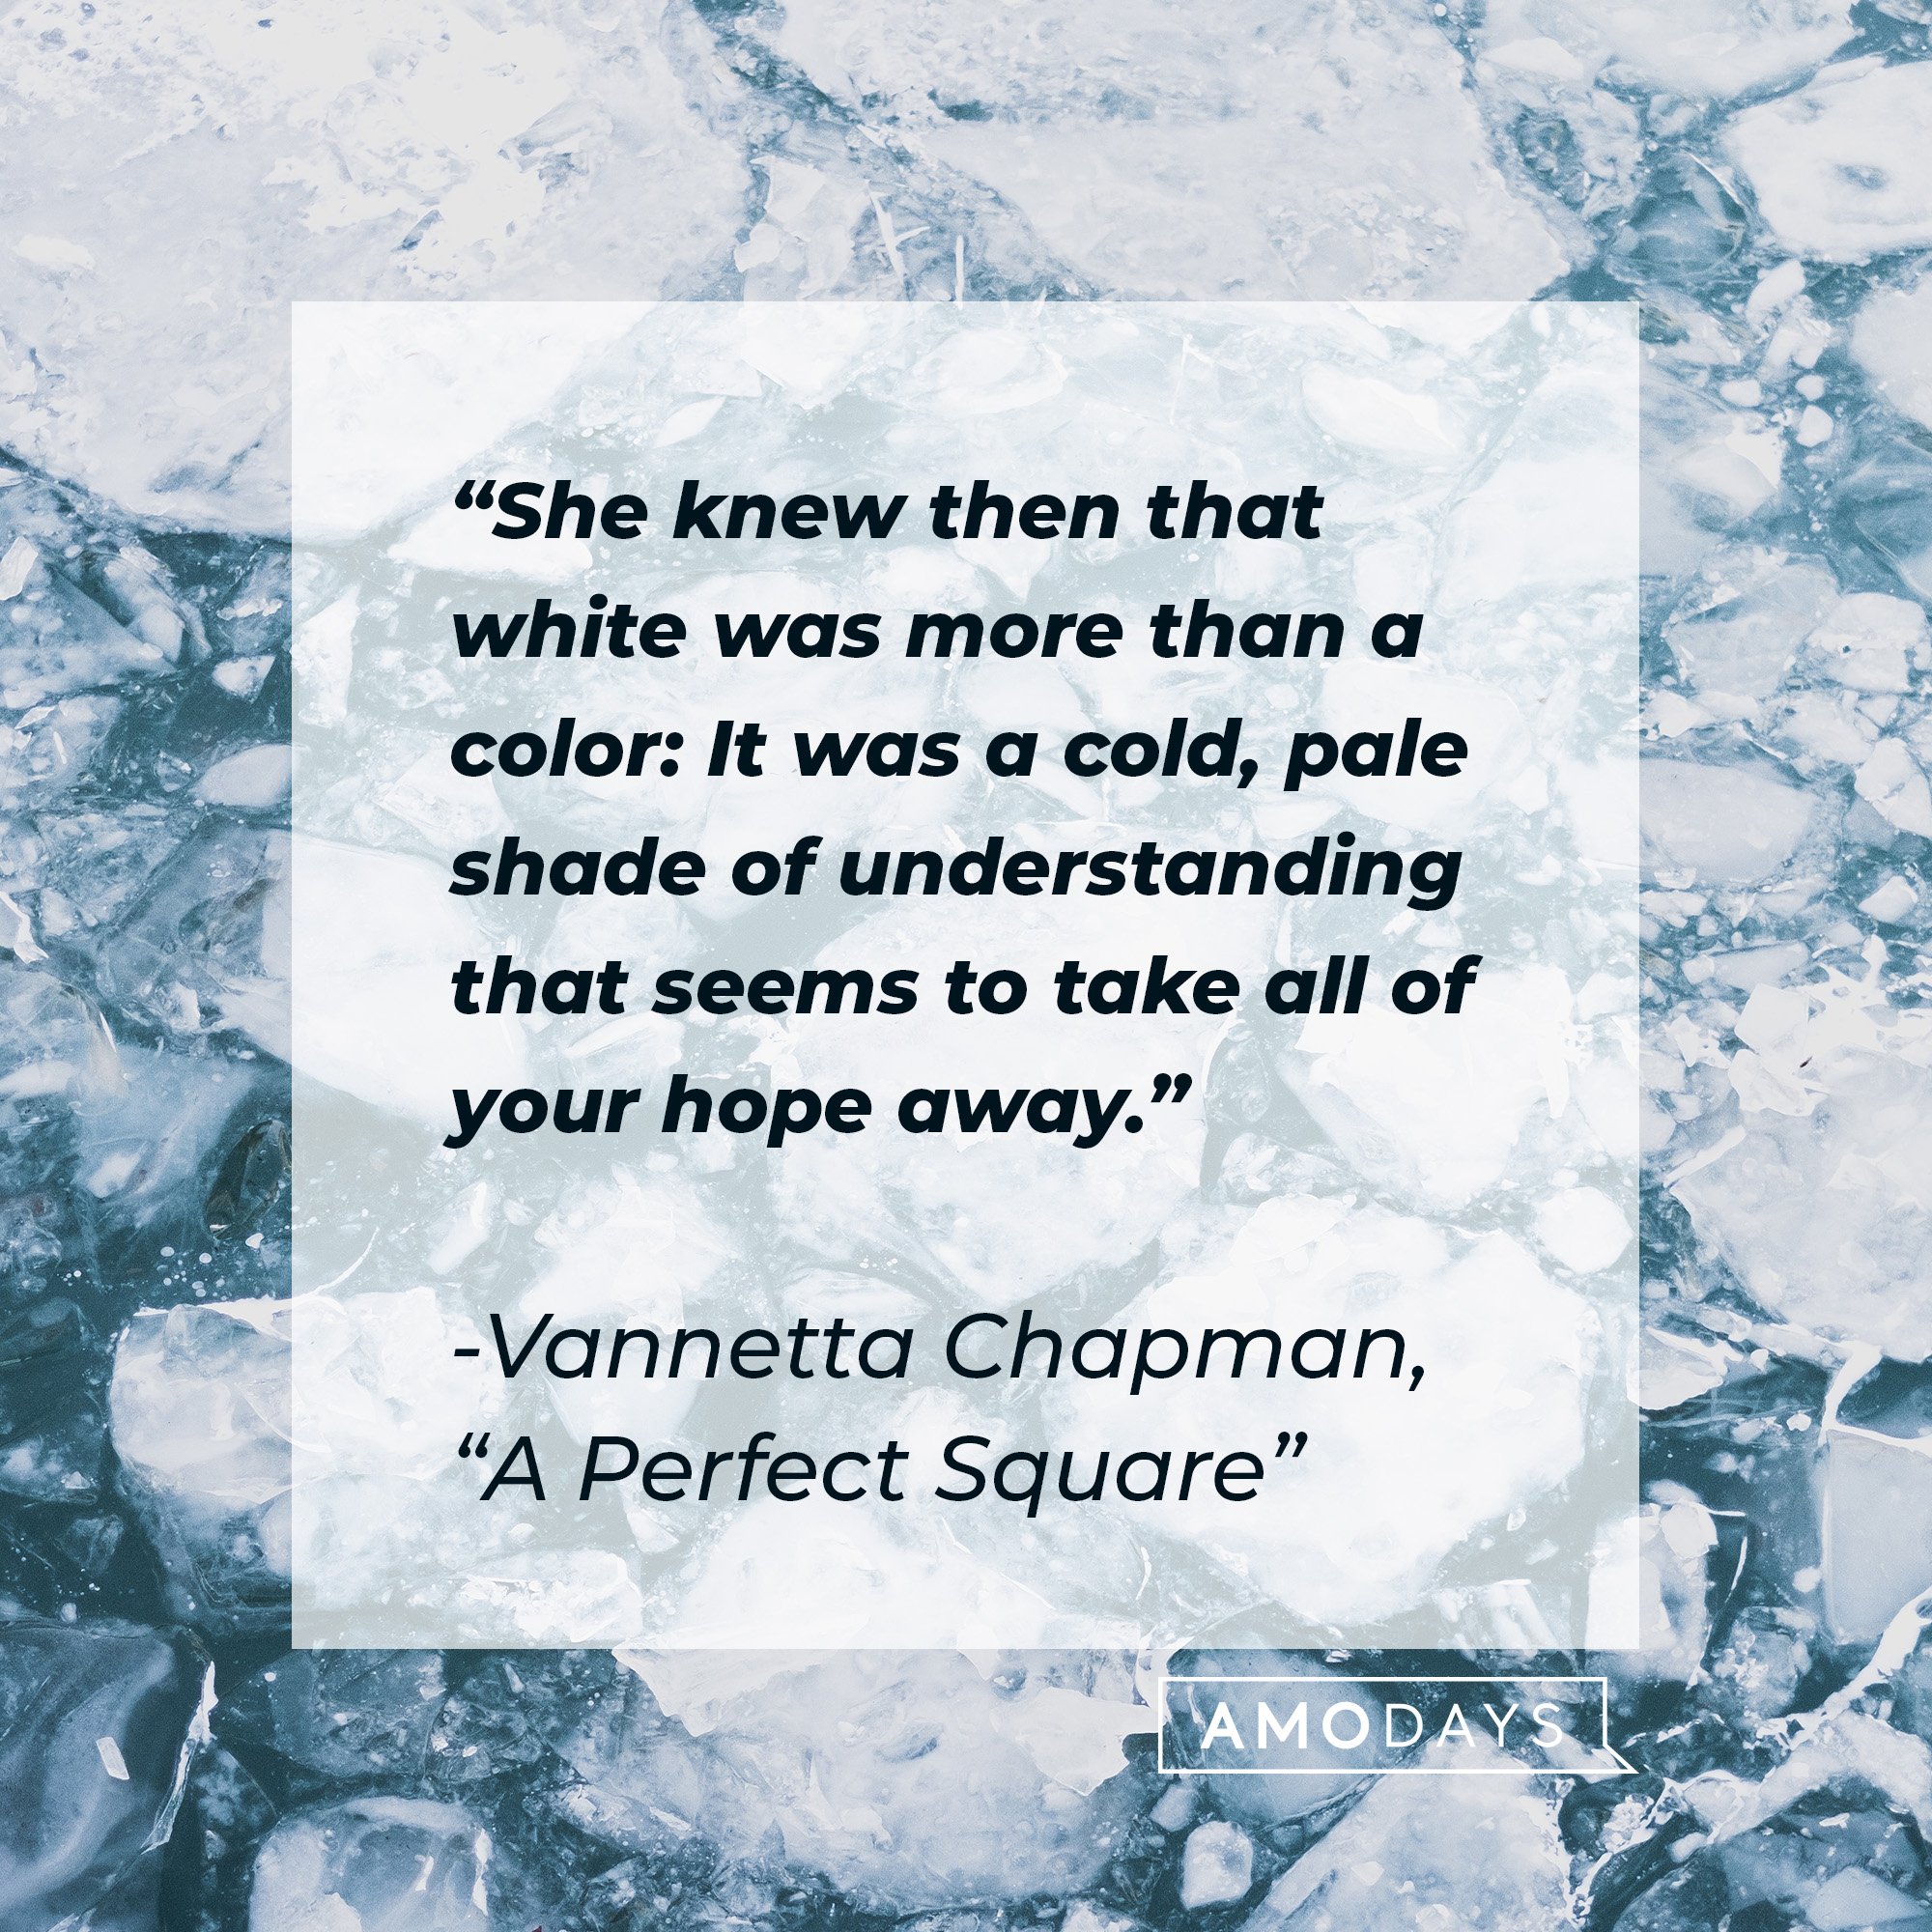 Vannetta Chapman’s quote from “A Perfect Square”:  "She knew then that white was more than a color: It was a cold, pale shade of understanding that seems to take all of your hope away." | Image: AmoDays 